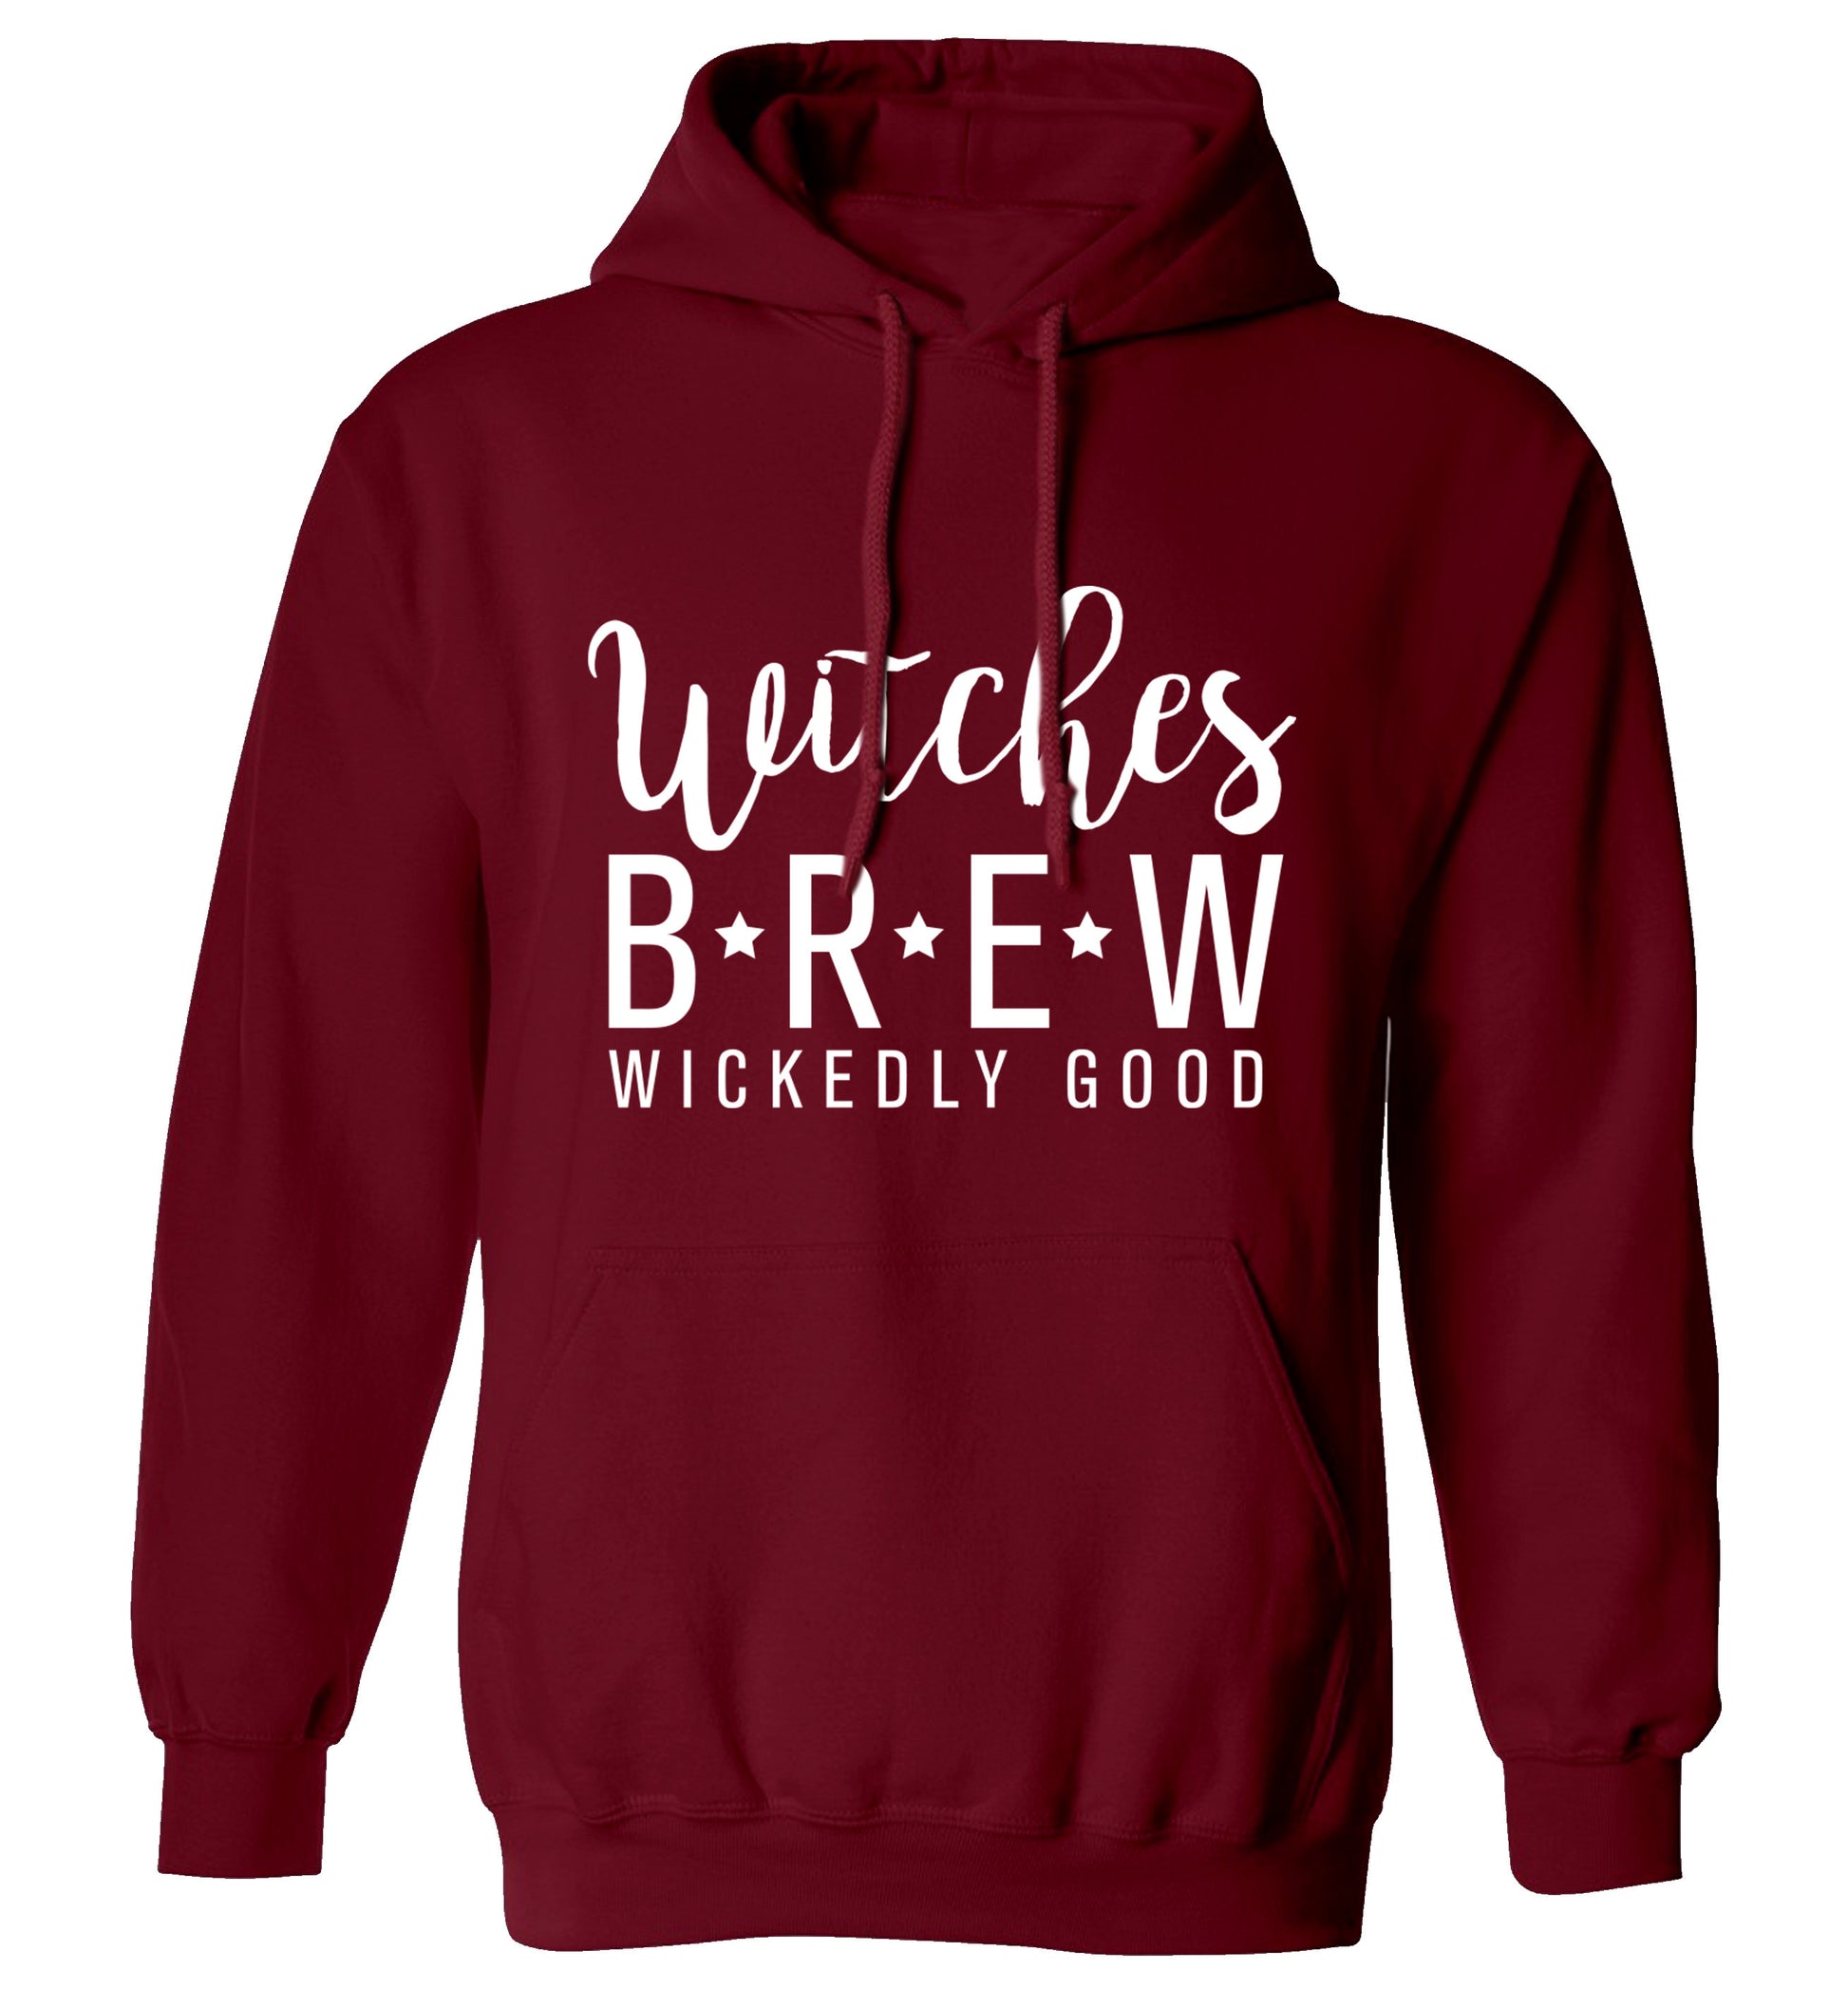 Witches Brew wickedly good adults unisex maroon hoodie 2XL